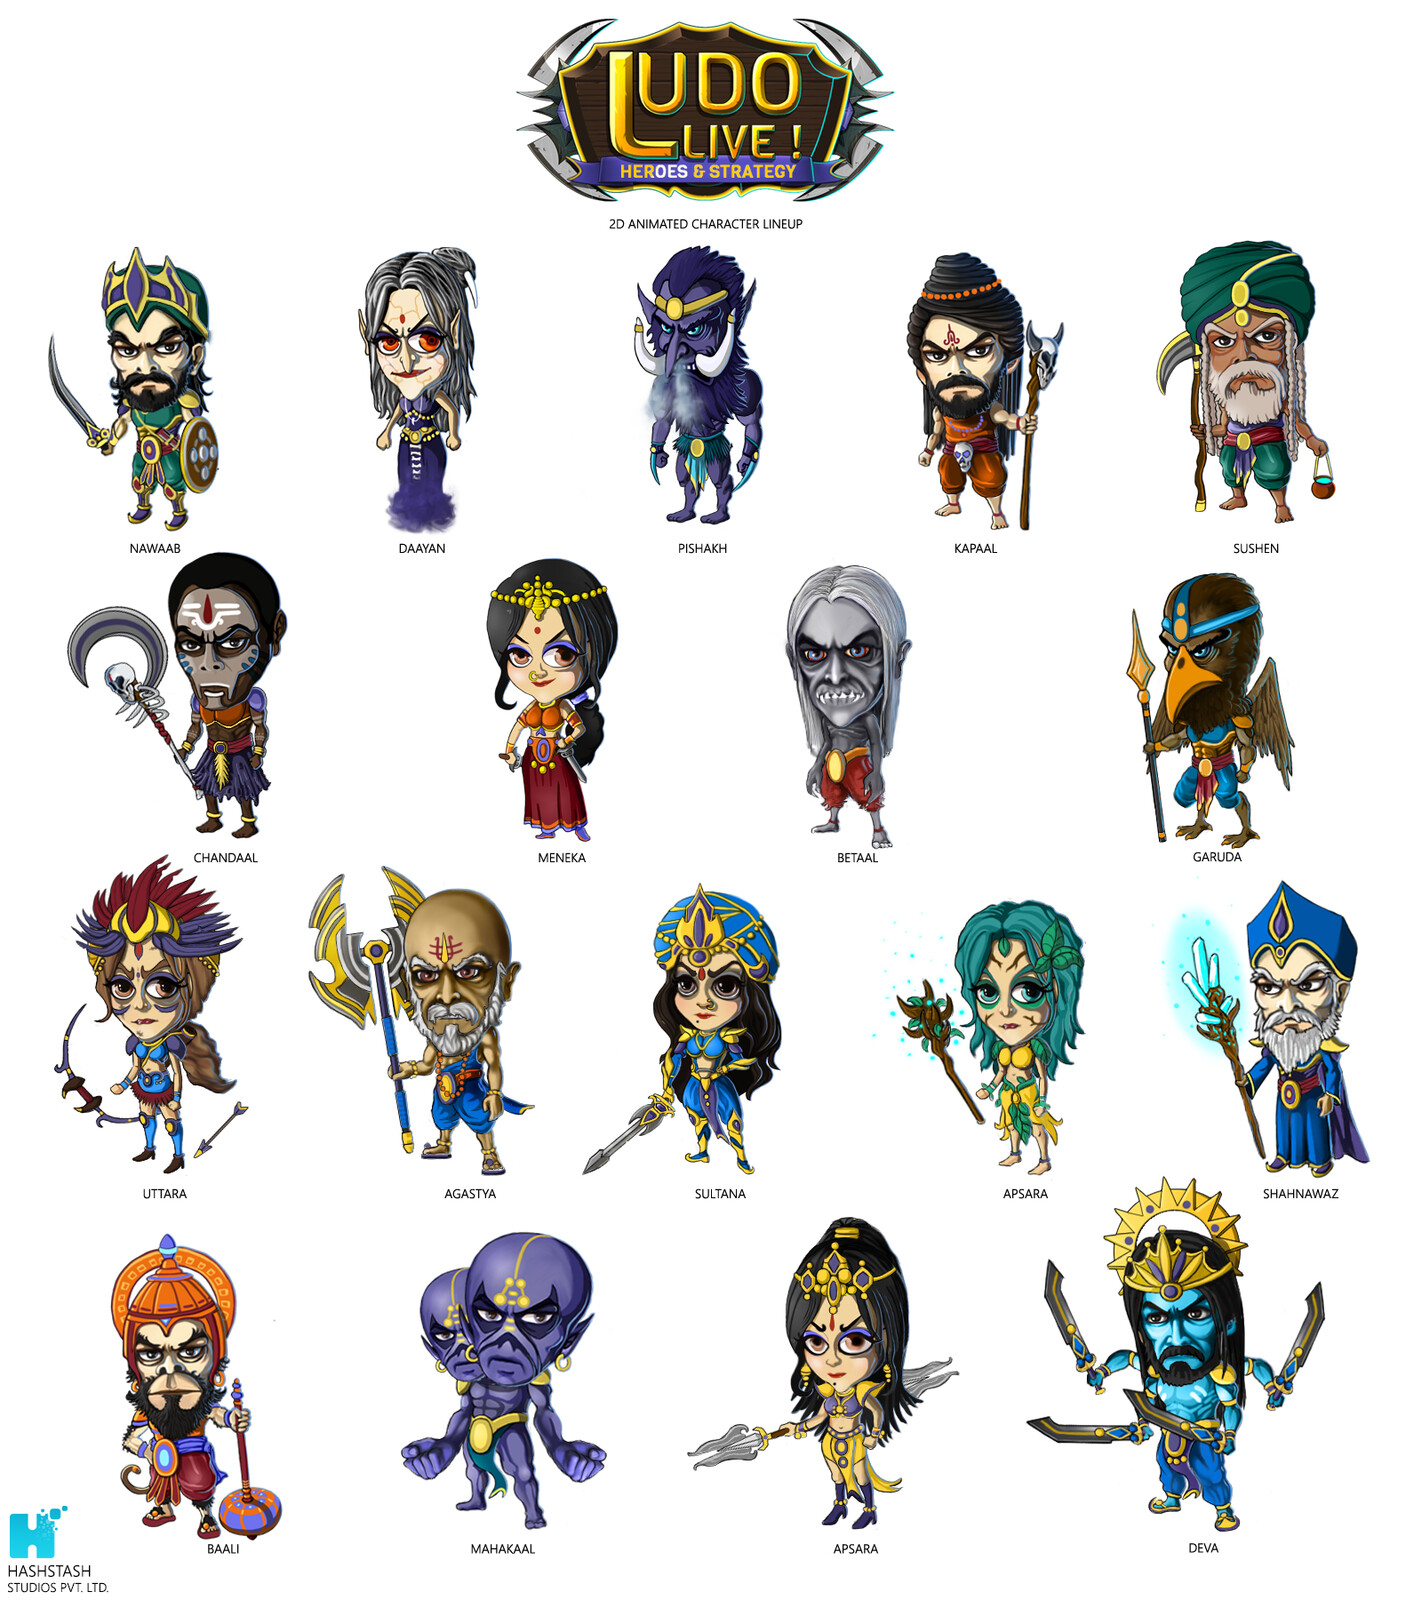 Full line up of final character art made in Photoshop